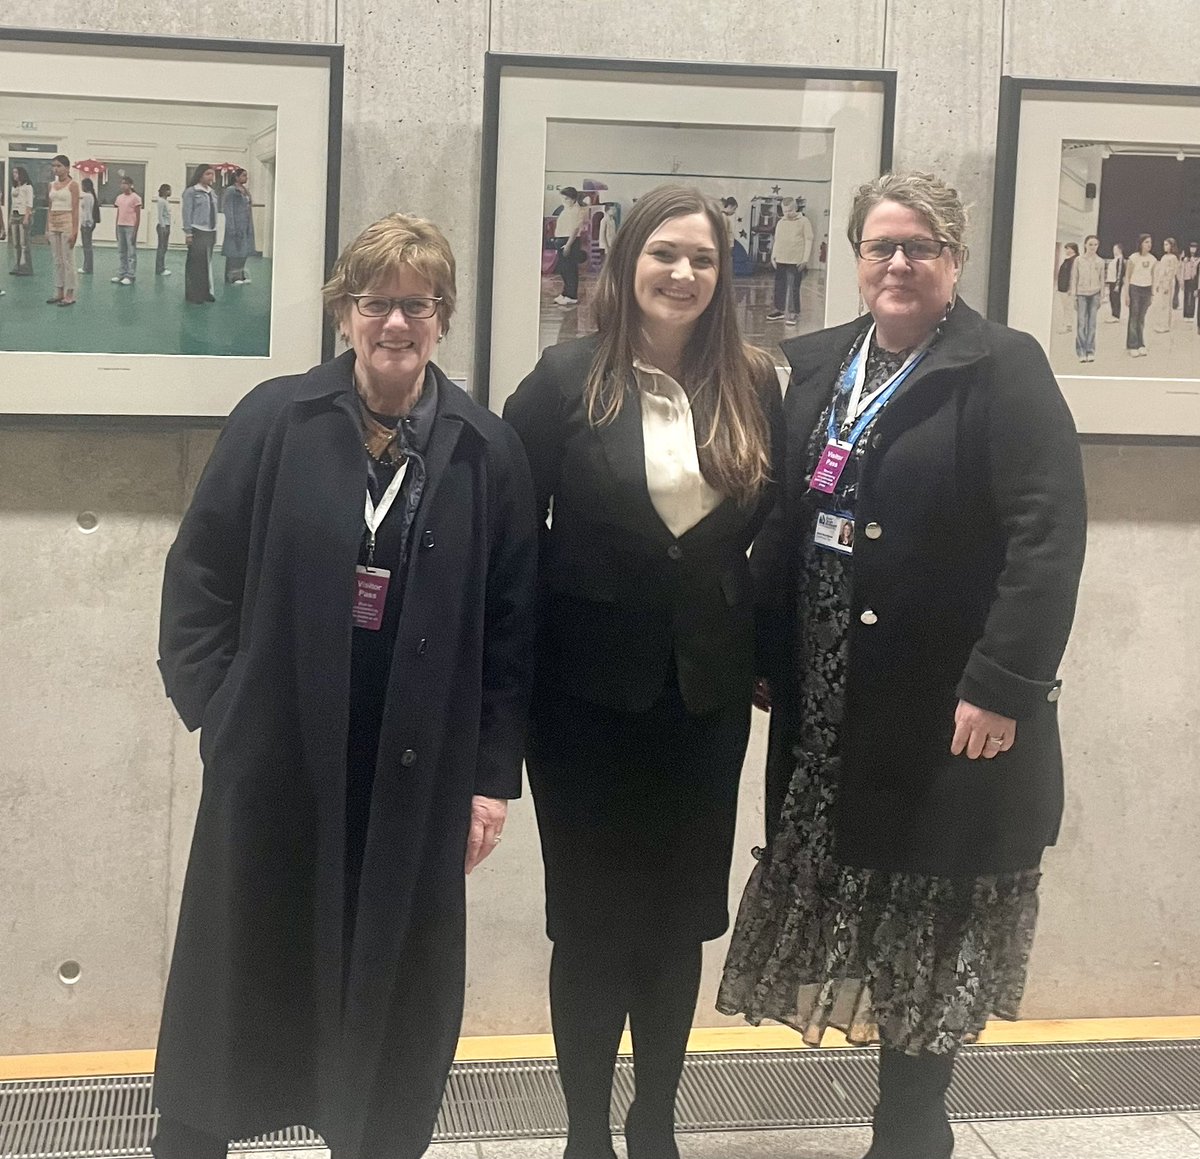 Good to meet with @earlyyearsscot Chair @mcgregor_marie and CEO, @Jane_Brumpton to discuss issues relating to ELC. It is very important to me to listen to voices across the childcare sector to understand and address the current challenges and in planning for further expansion.